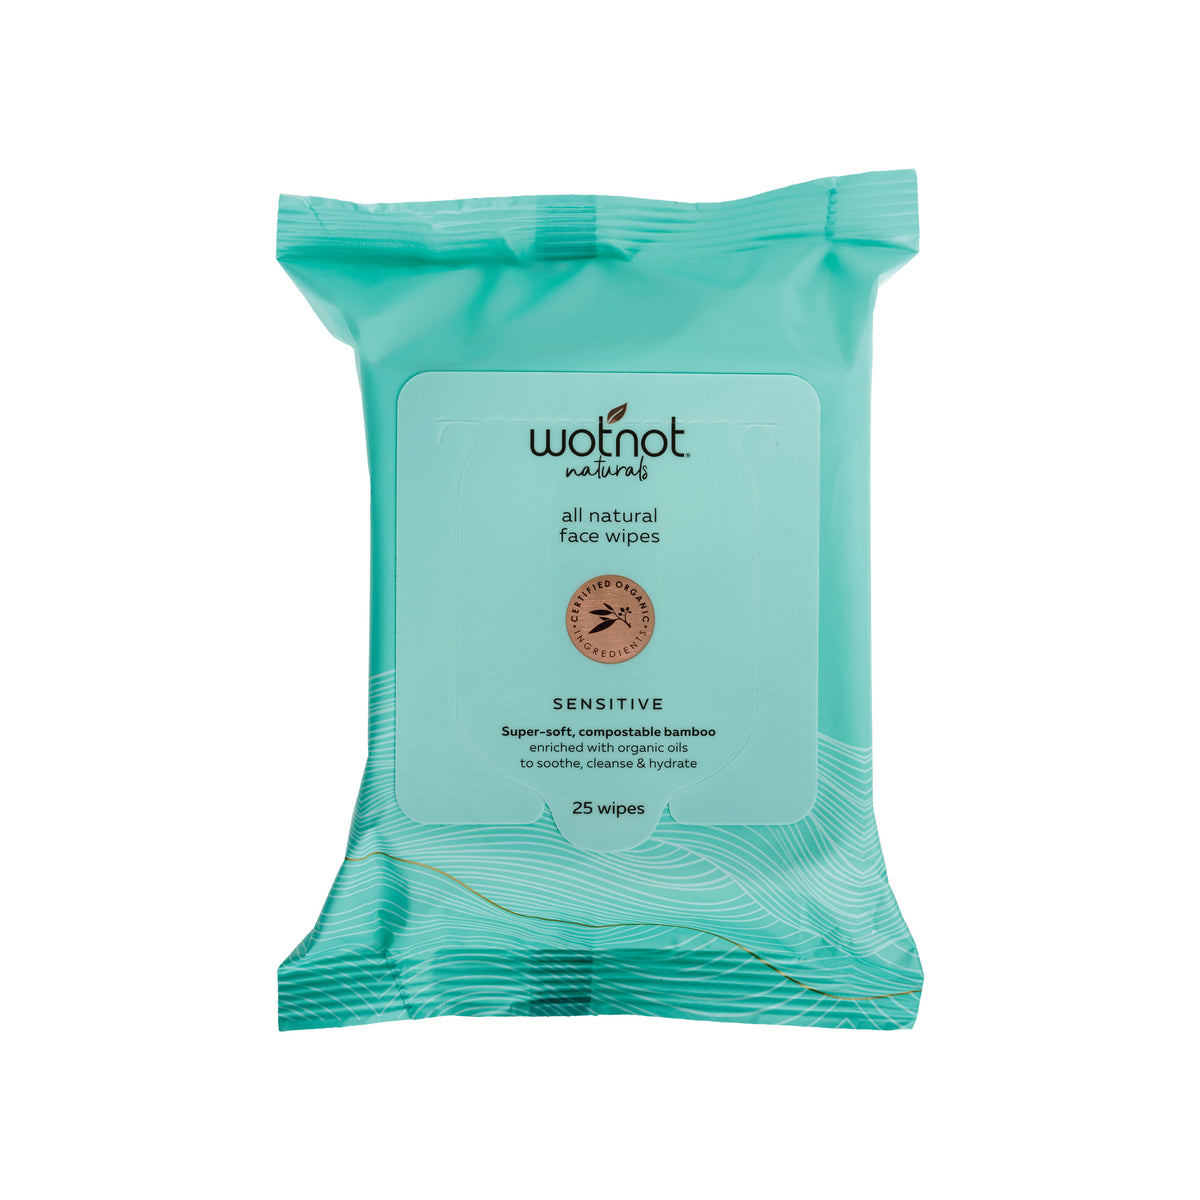 Wotnot Natural Face Wipes Soft Sensitive - All Skin Types 25pk